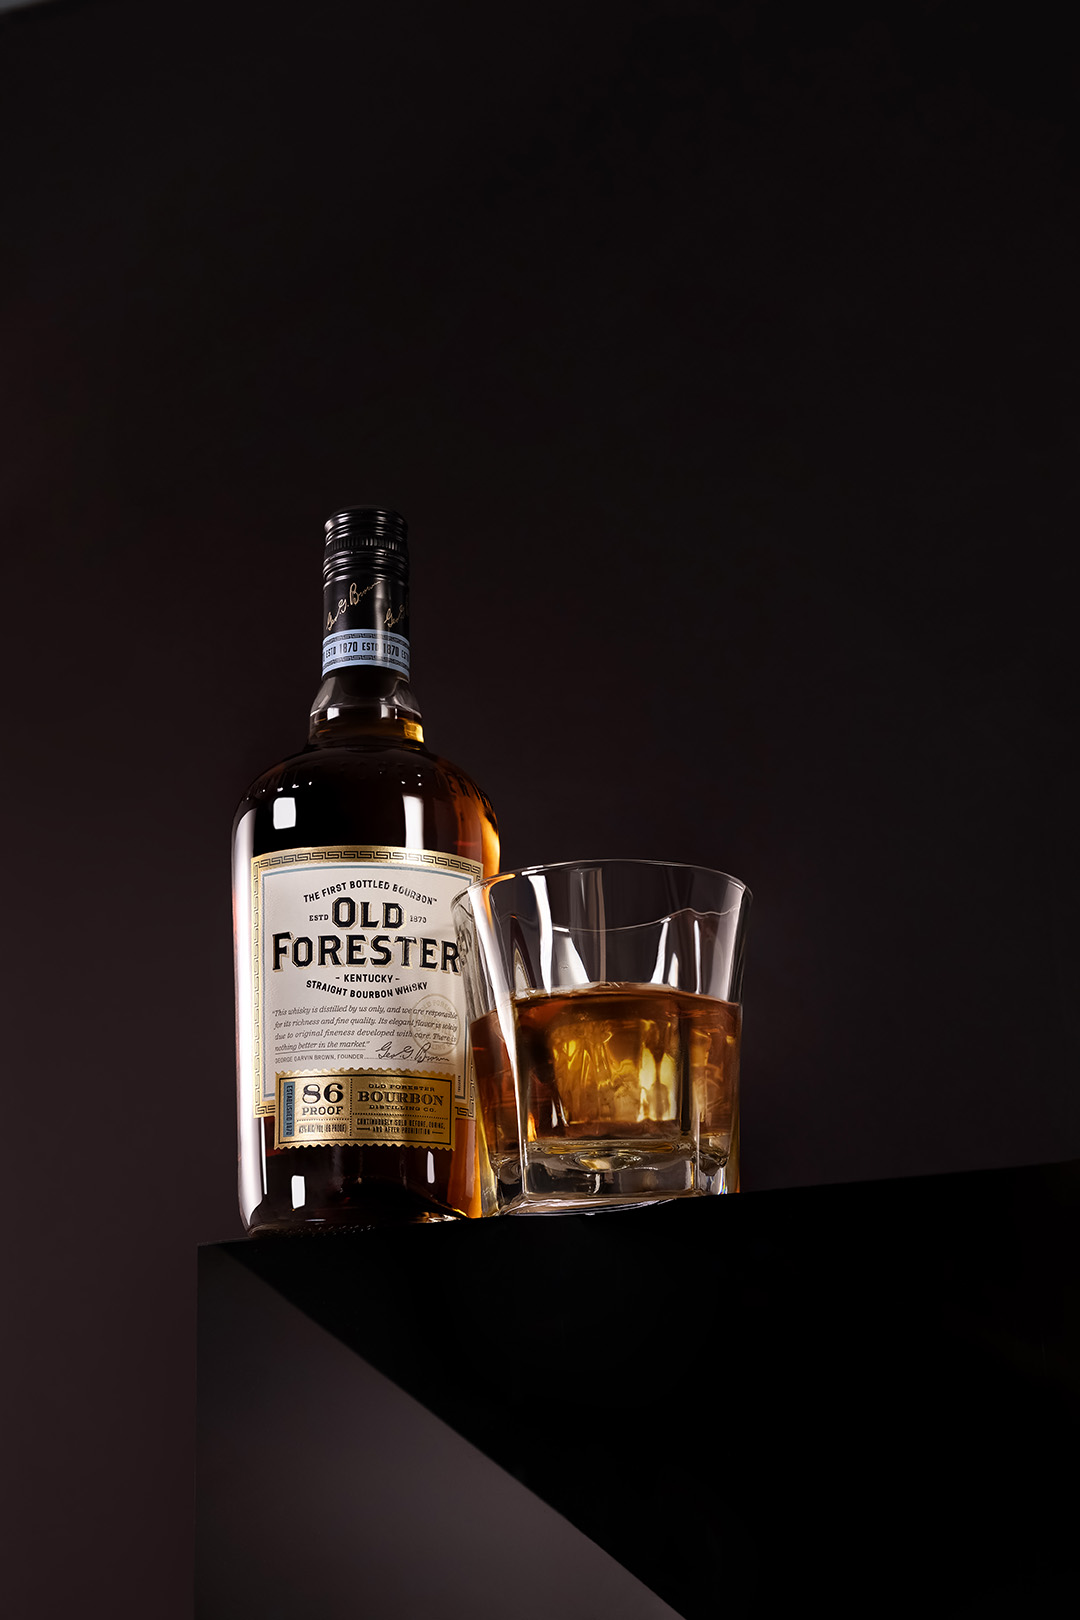 Old Forester Whisky creative photo session